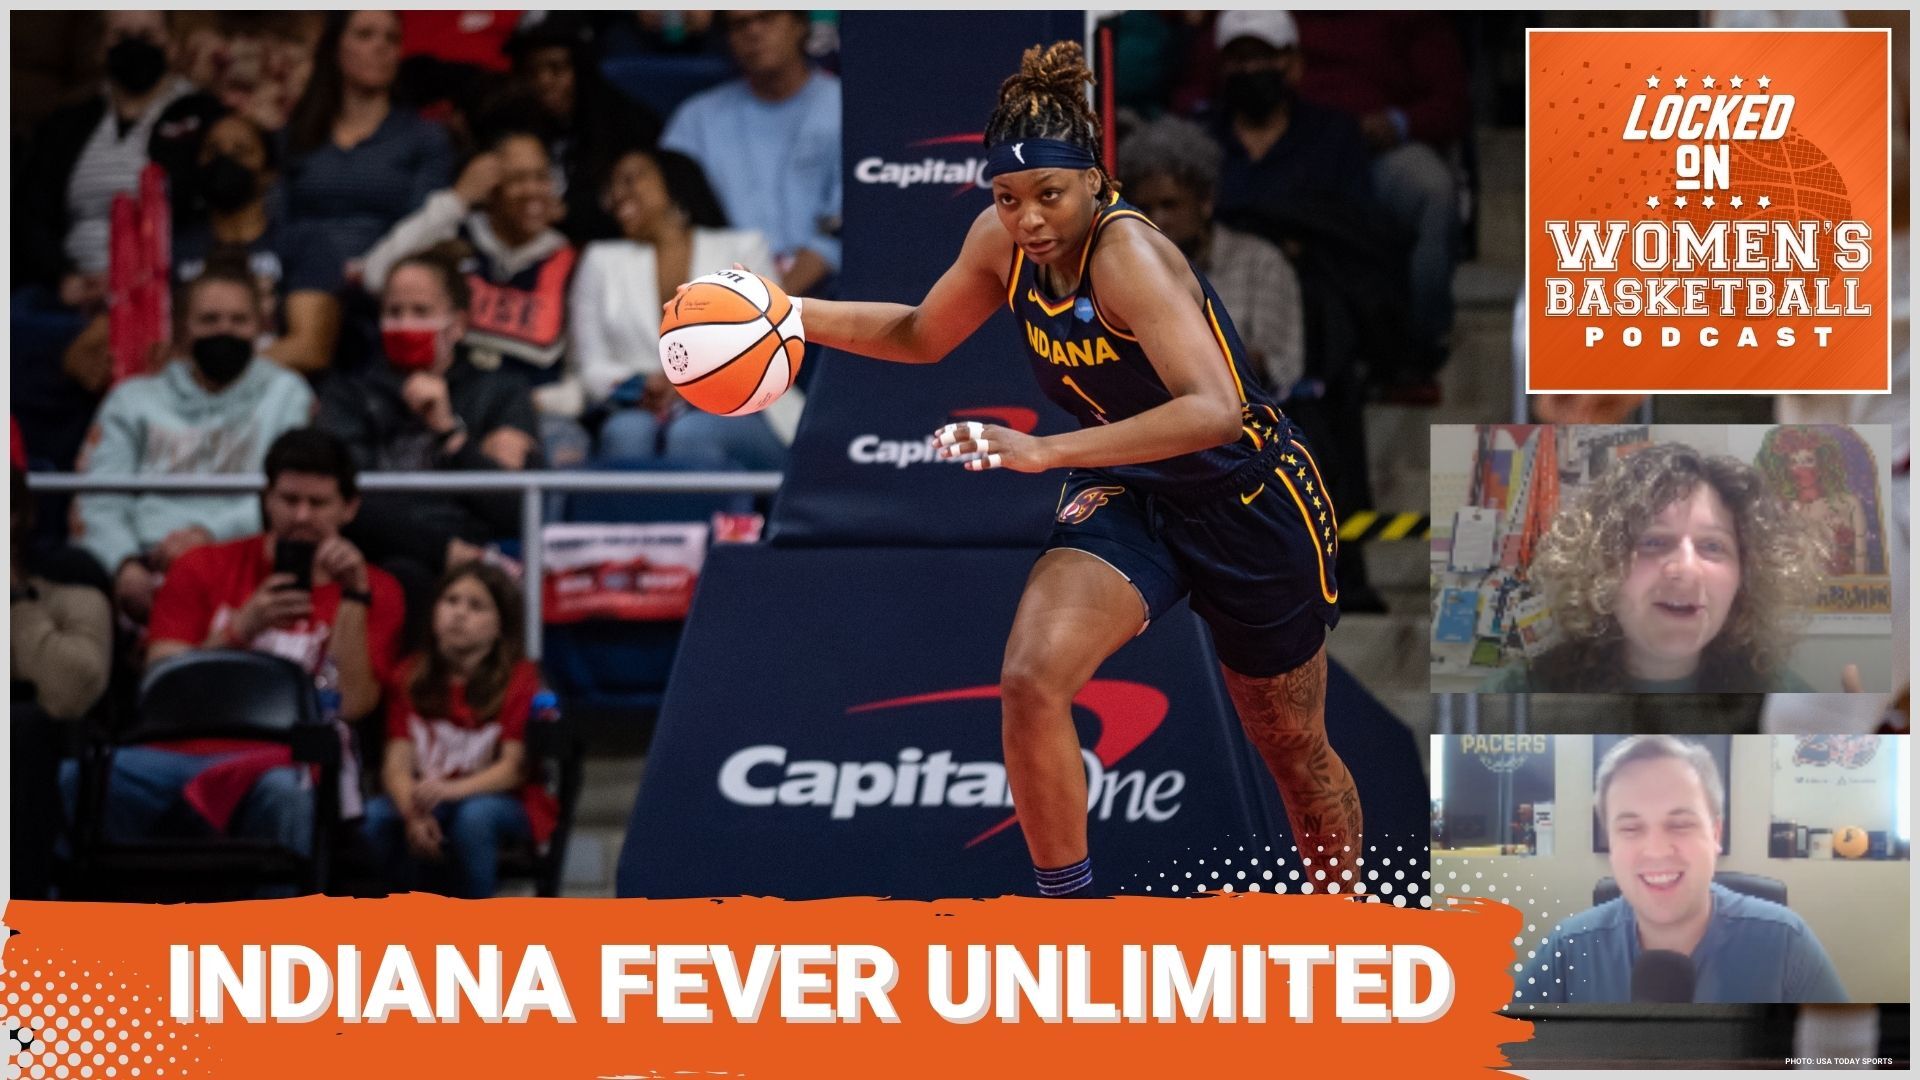 Indiana Fever Blog – The Indiana Fever and Women's Basketball